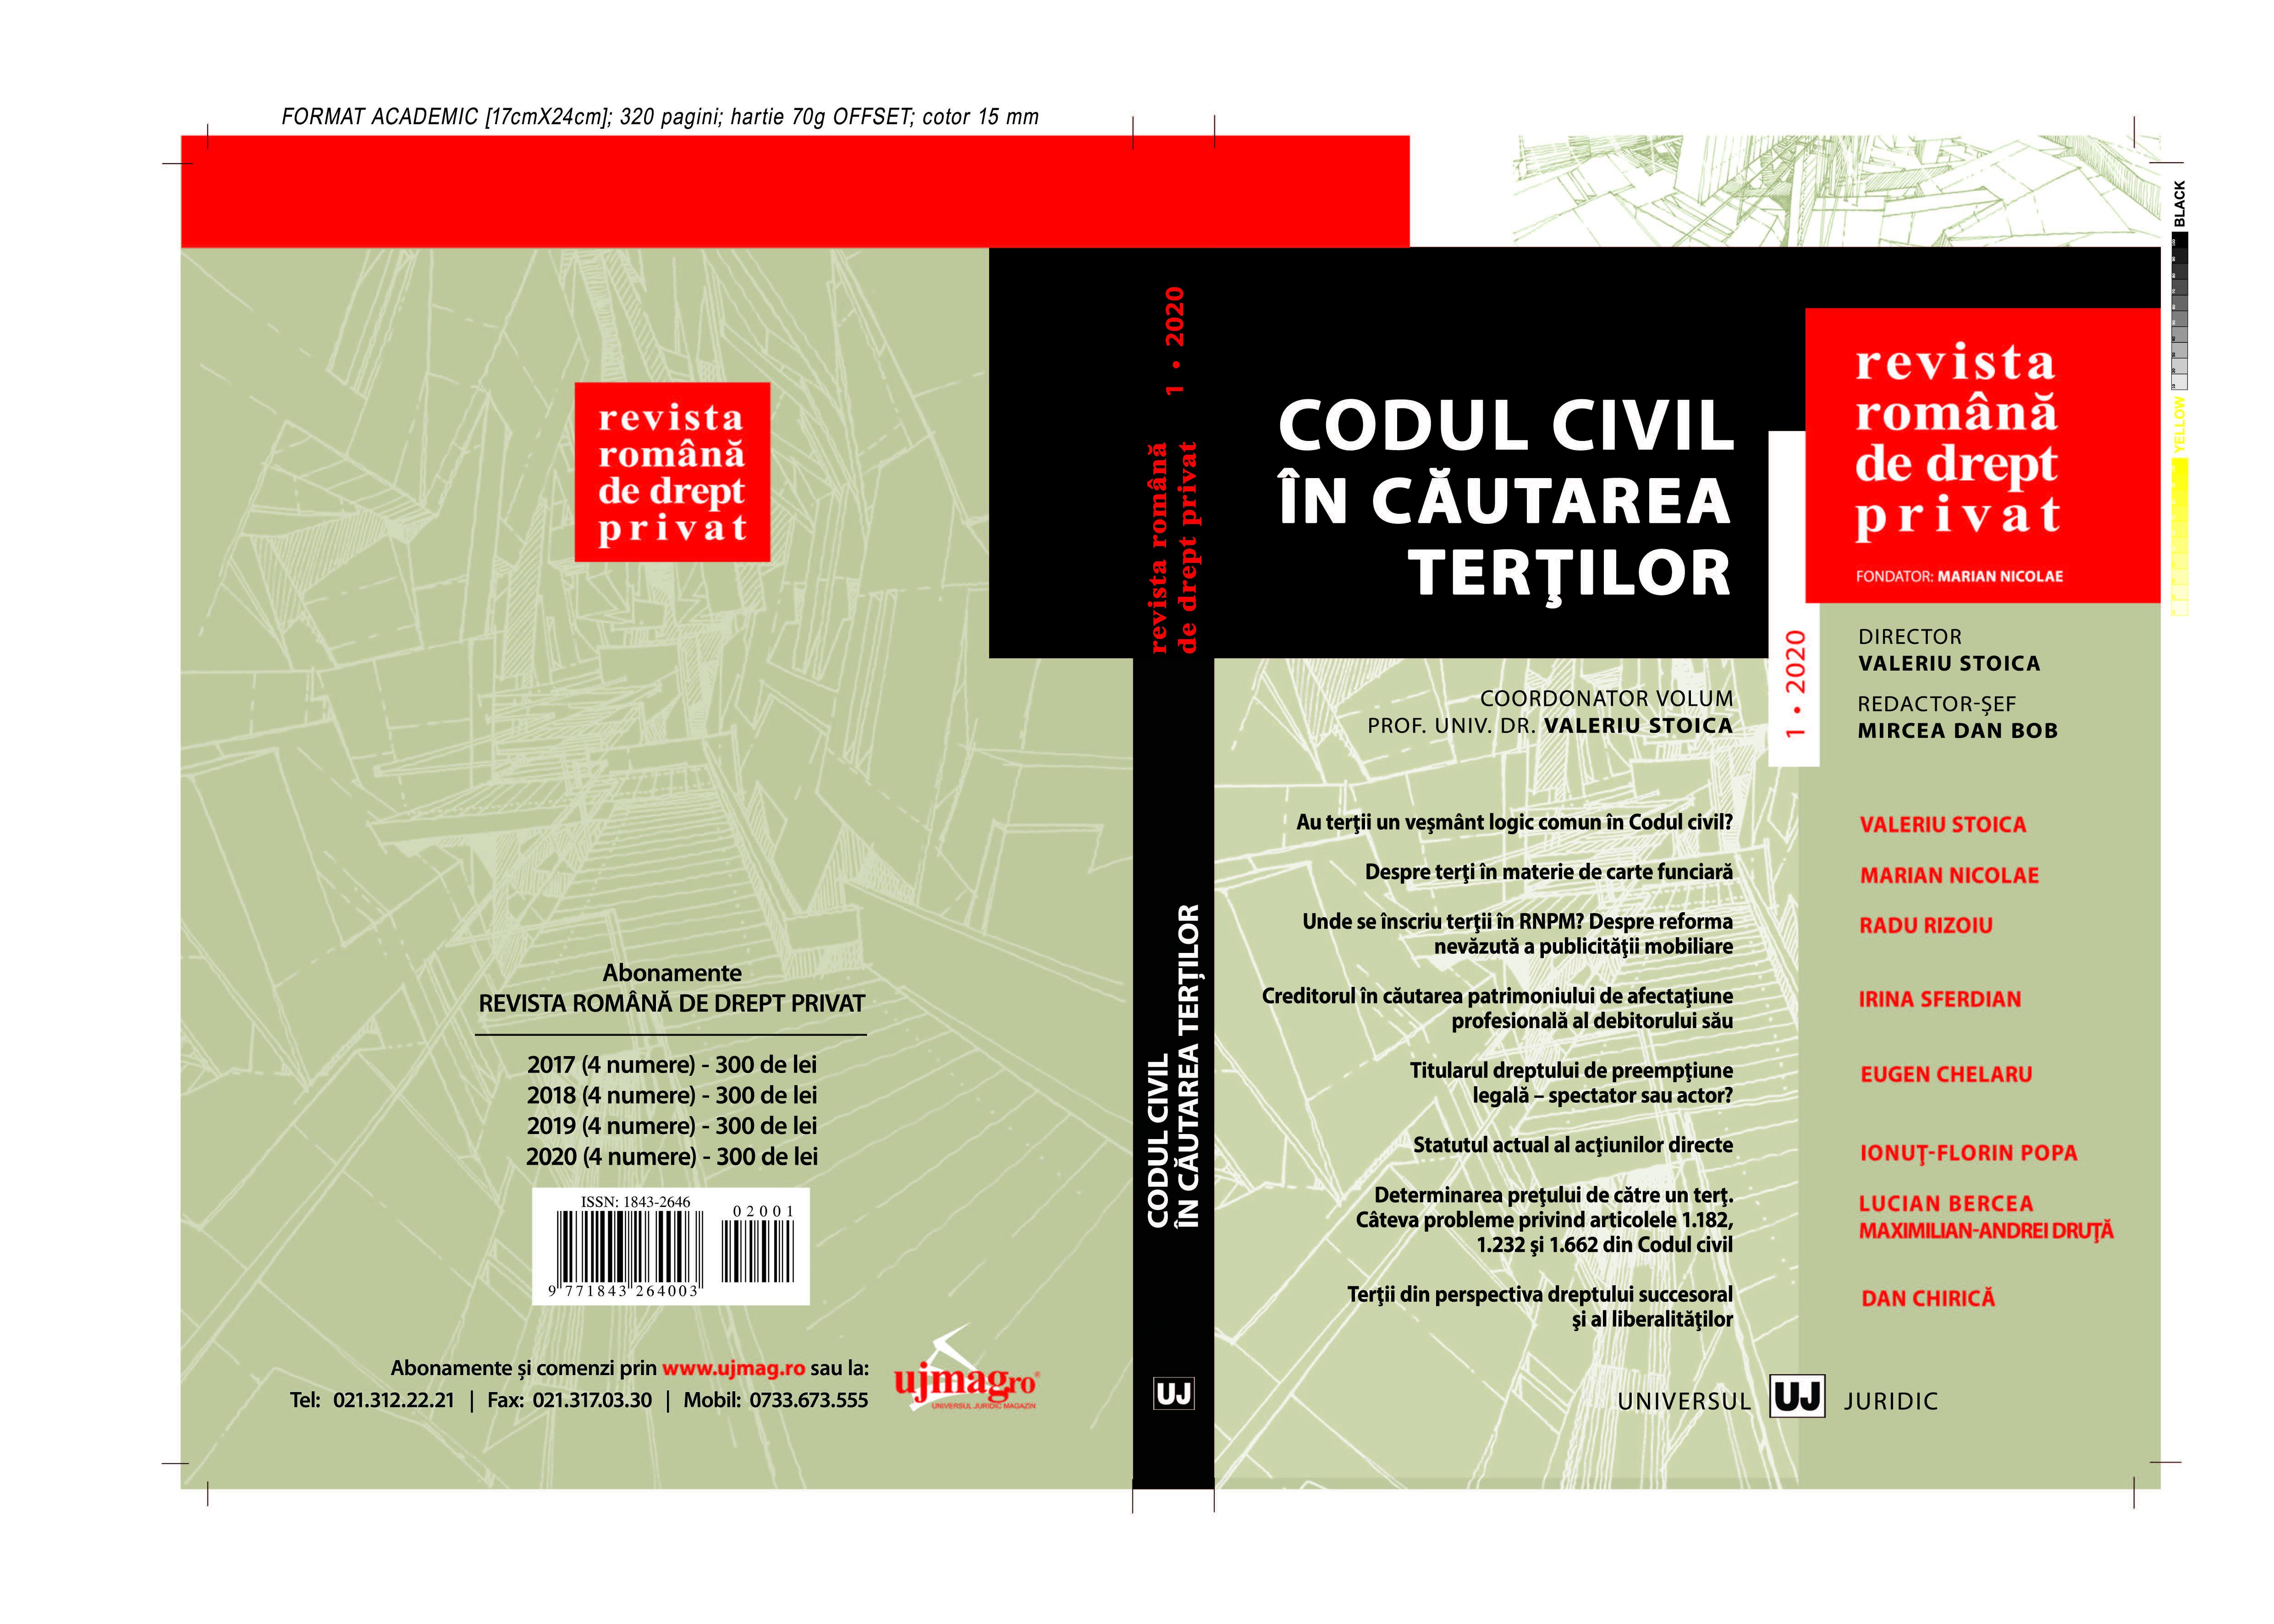 Do third parties have a common logical mantle in the Civil Code? Cover Image